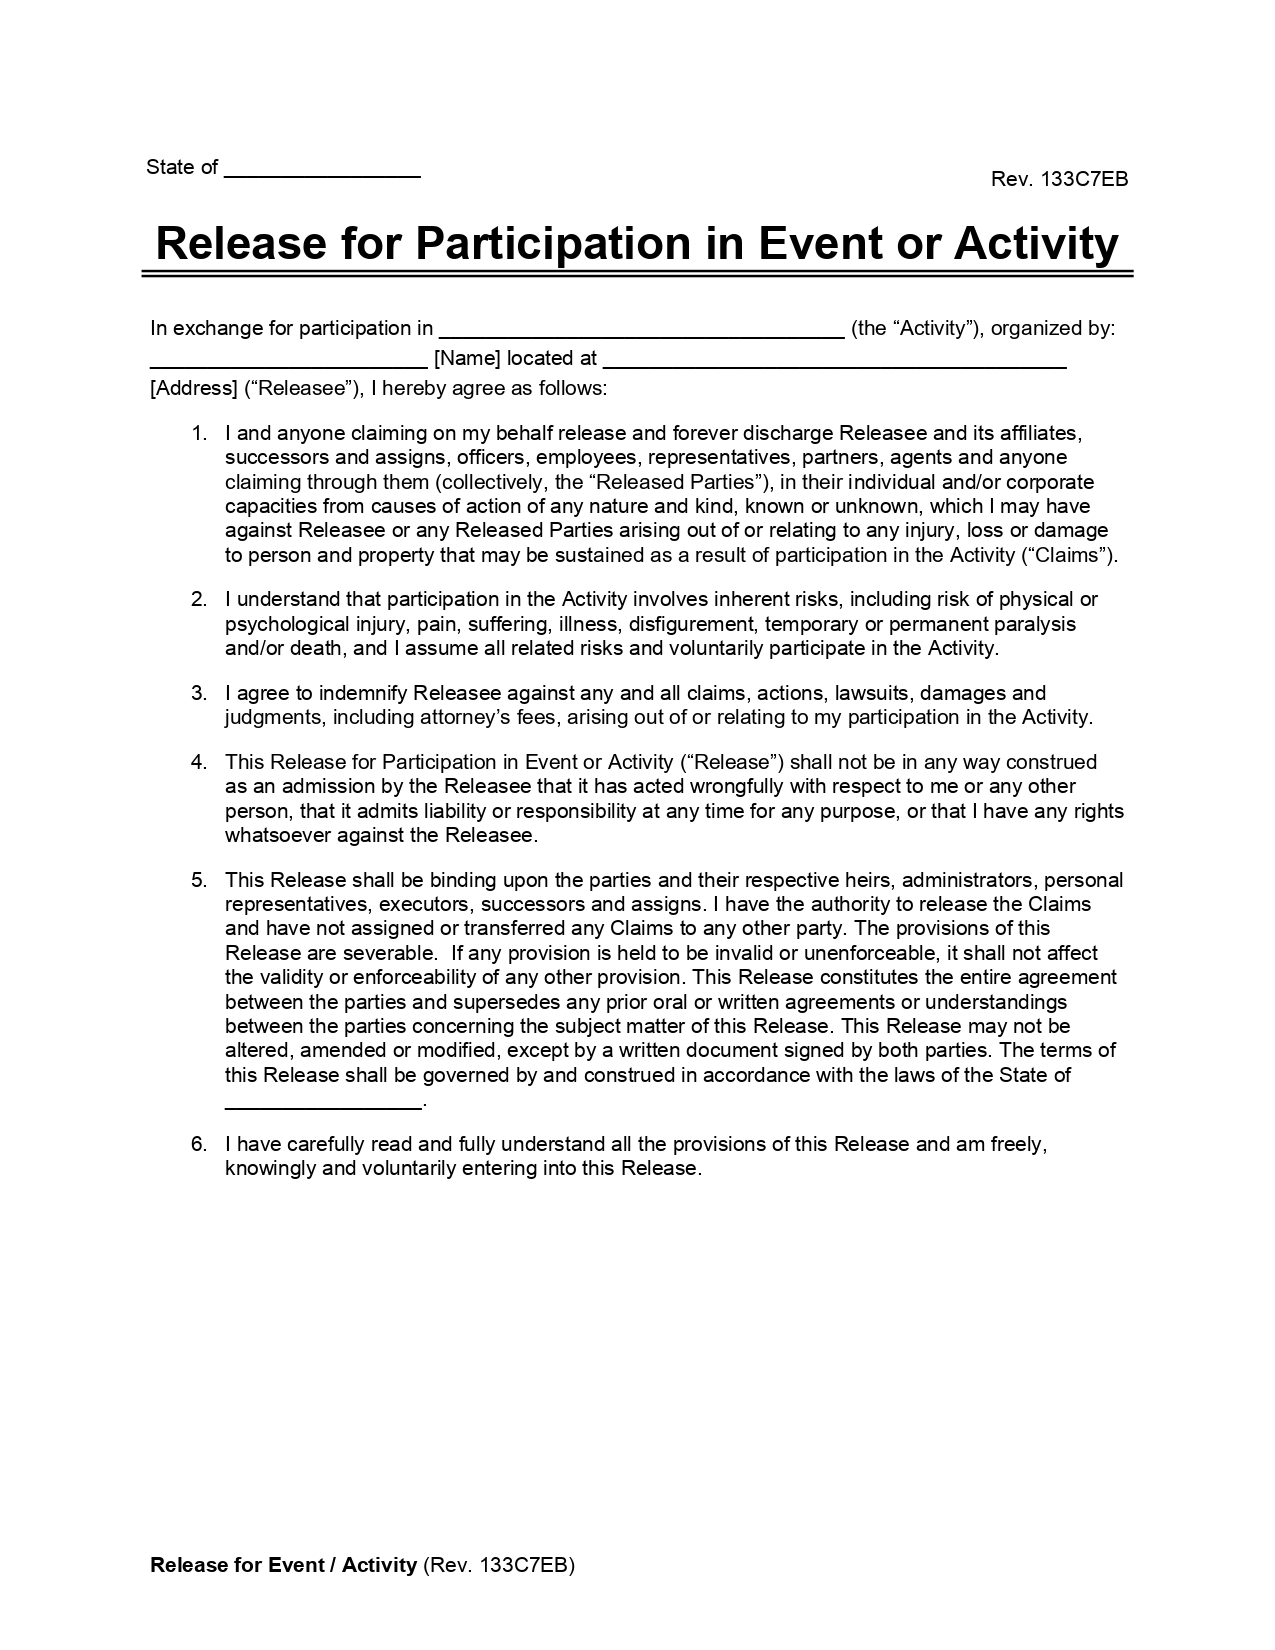 Release for Participation in Event or Activity Form